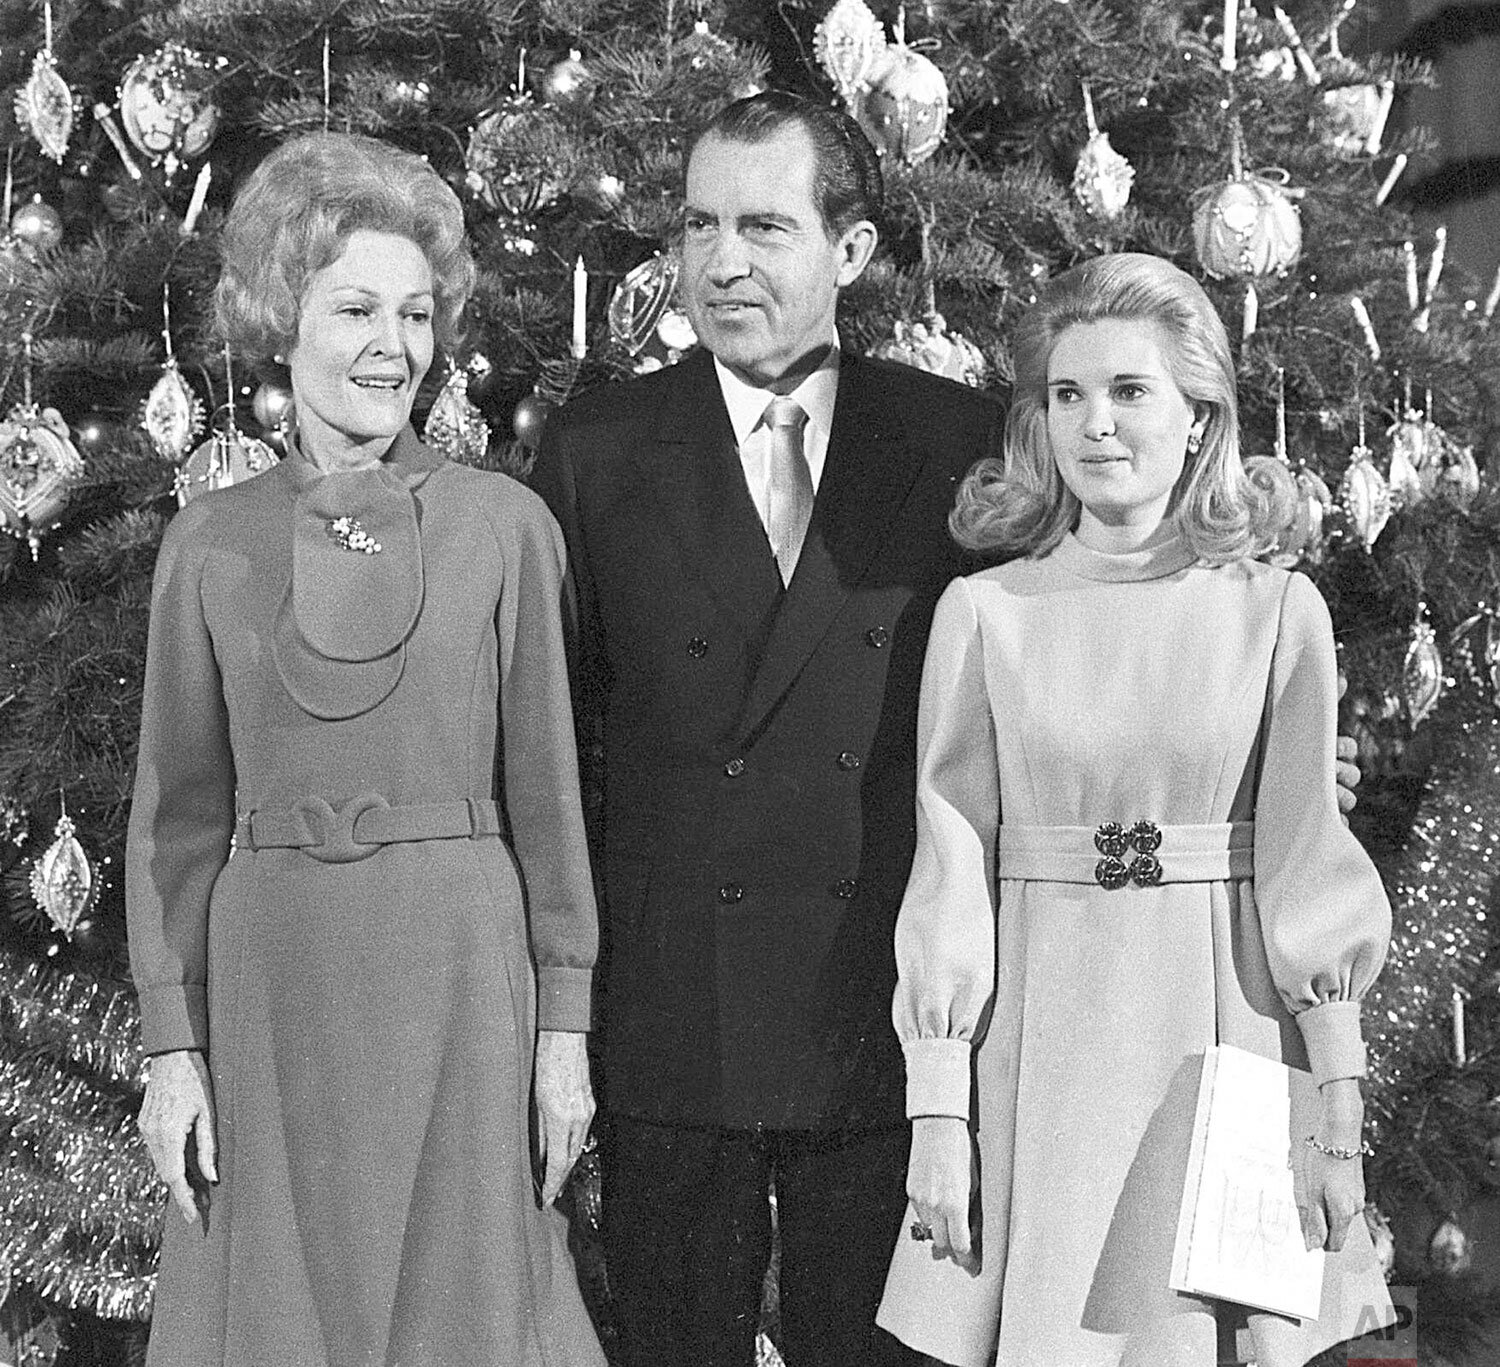  U.S. President Richard Nixon, first lady Pat Nixon and their daughter Tricia stand beside the Christmas tree in the main lobby of the White House on Dec. 21, 1969, following a worship service. (AP Photo) 